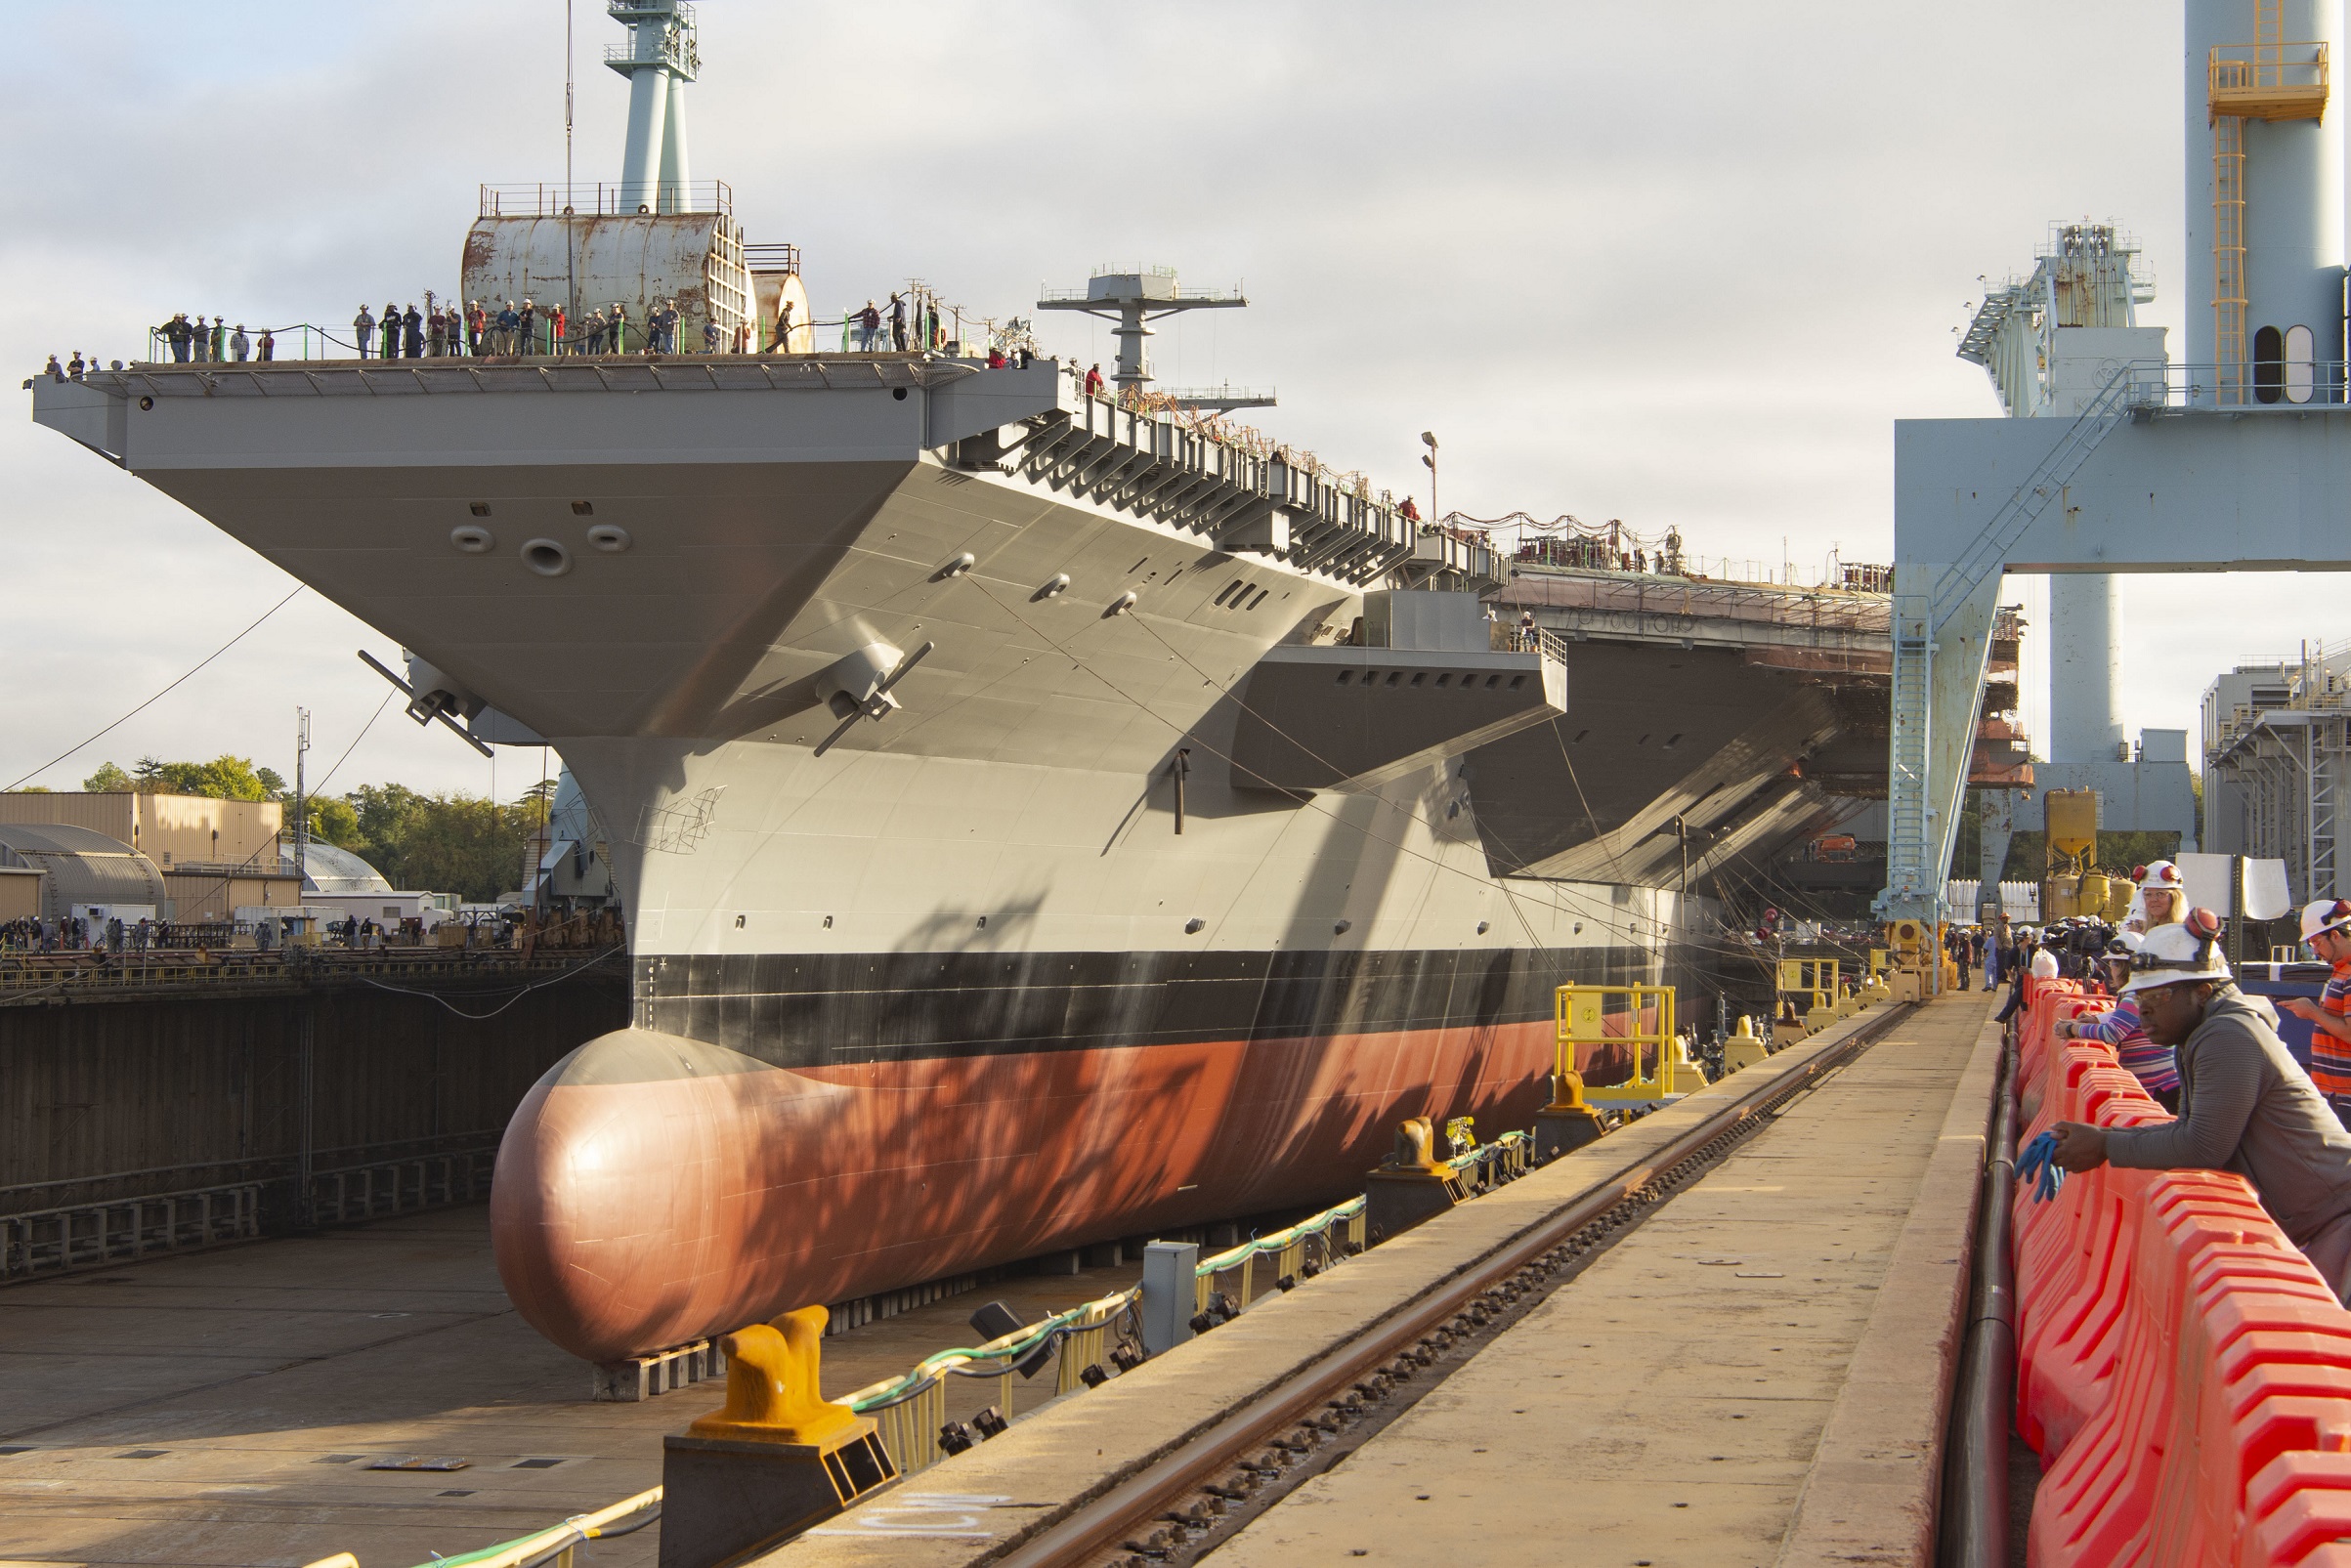 New Gerald R. Ford-Class Aircraft Carrier John F. Kennedy to be Christened Dec. 7